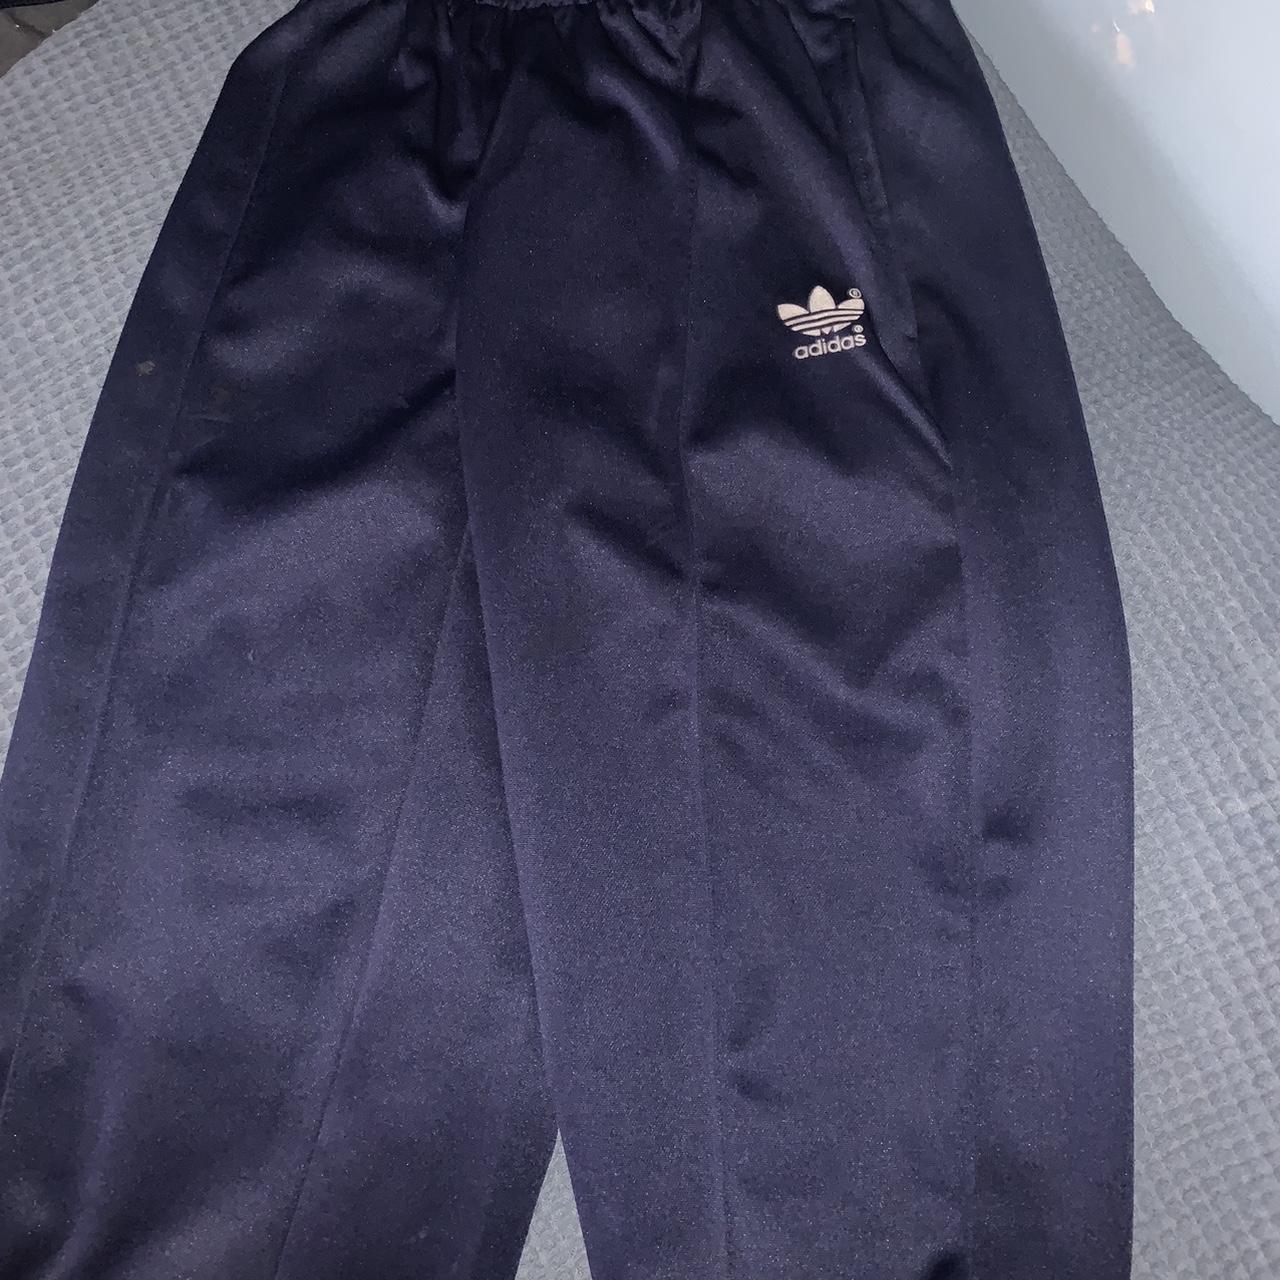 blue adidas joggers worn a couple times size S - Depop